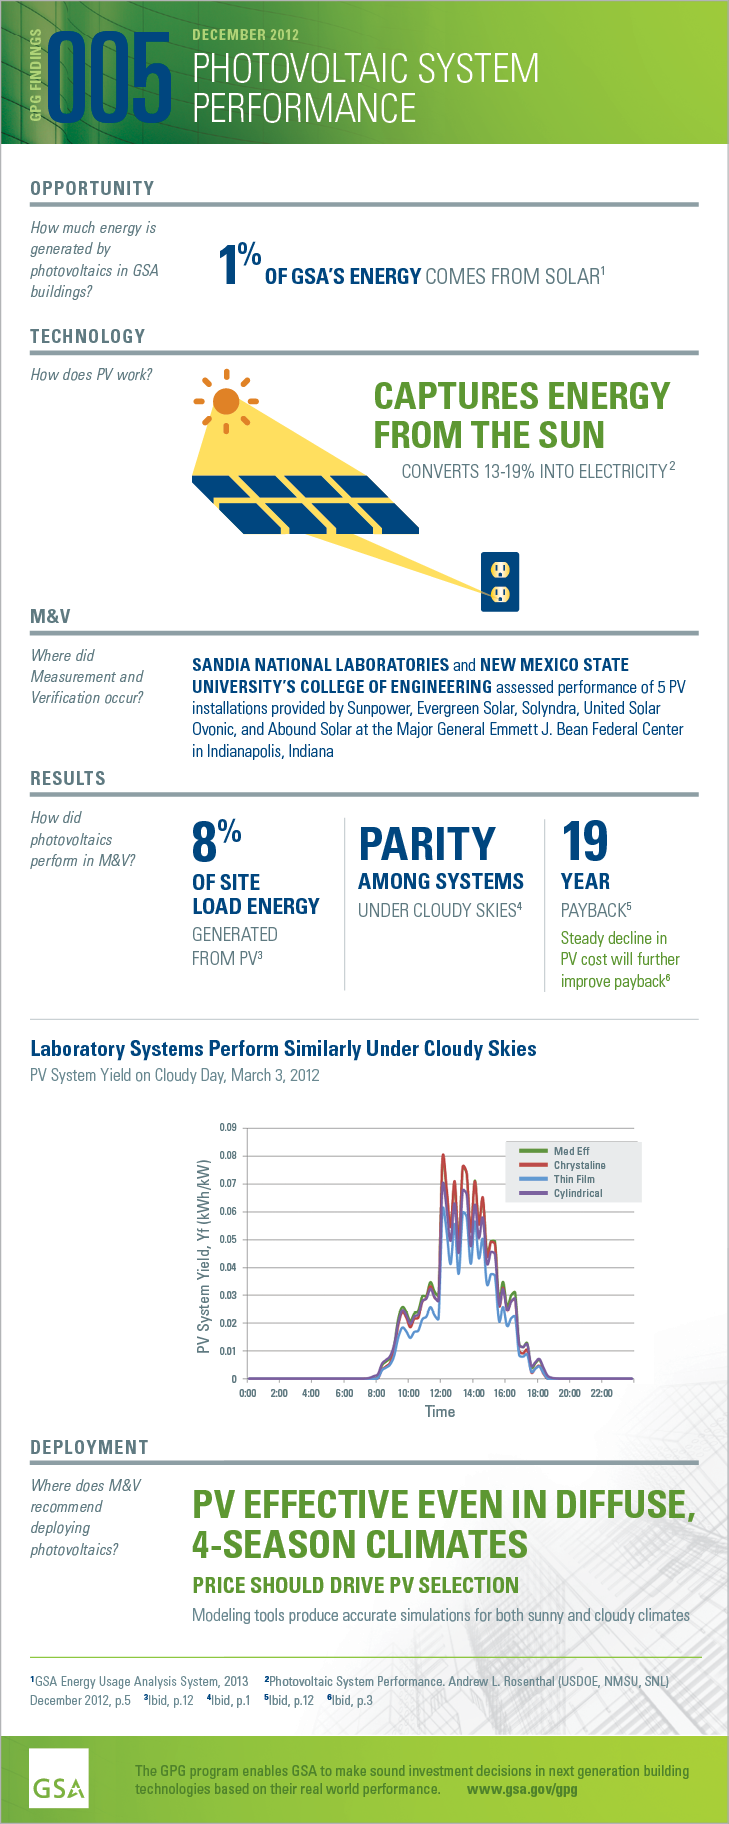 Download the PDF version of the full-sized infographic for GPG005 PV System Performance.